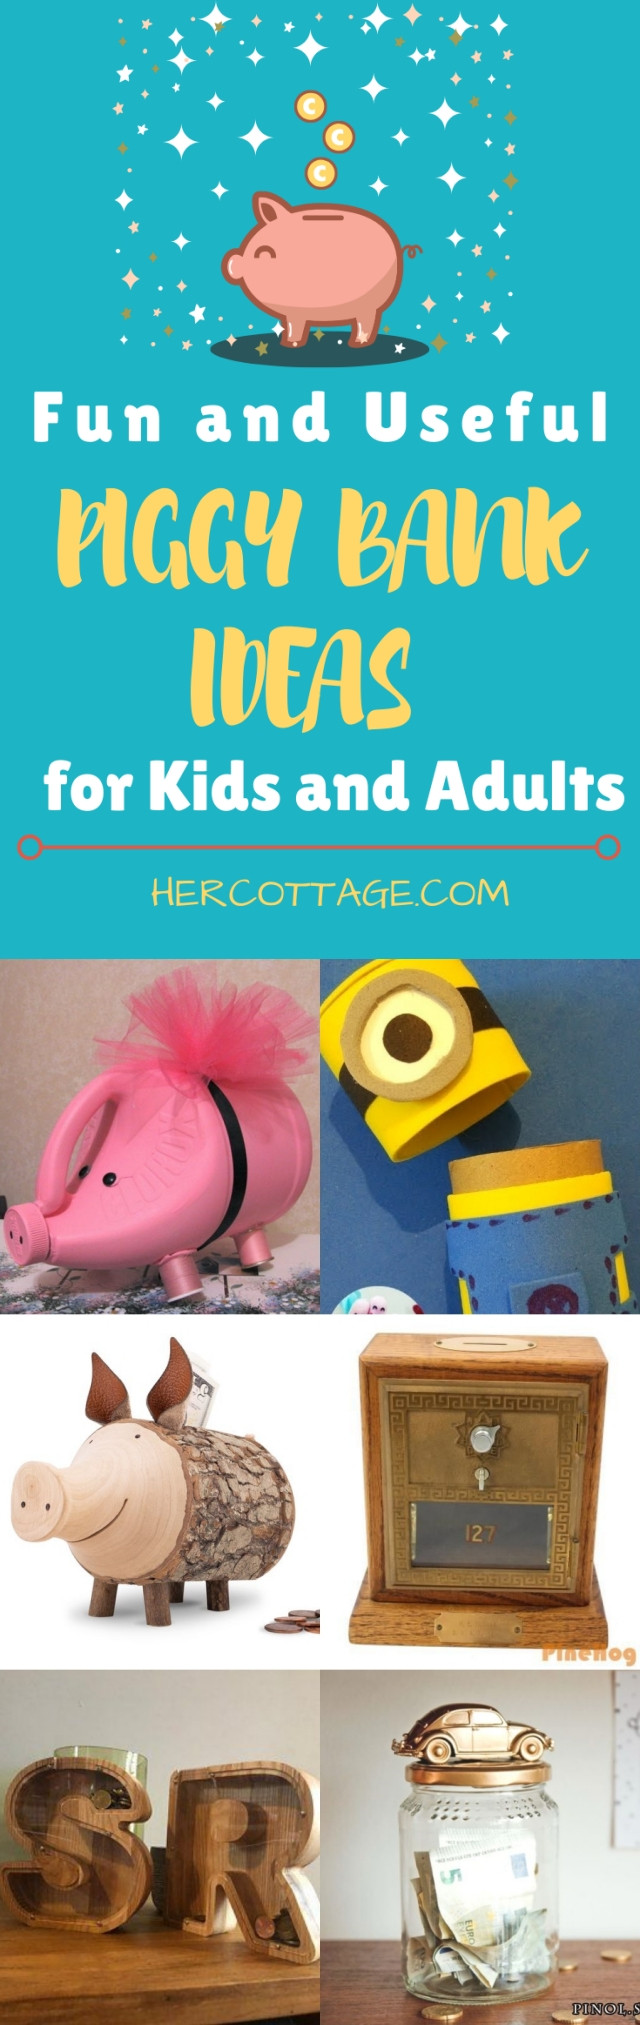 DIY Piggy Bank For Adults
 40 Fun and Useful DIY Piggy Bank Ideas for Kids and Adults